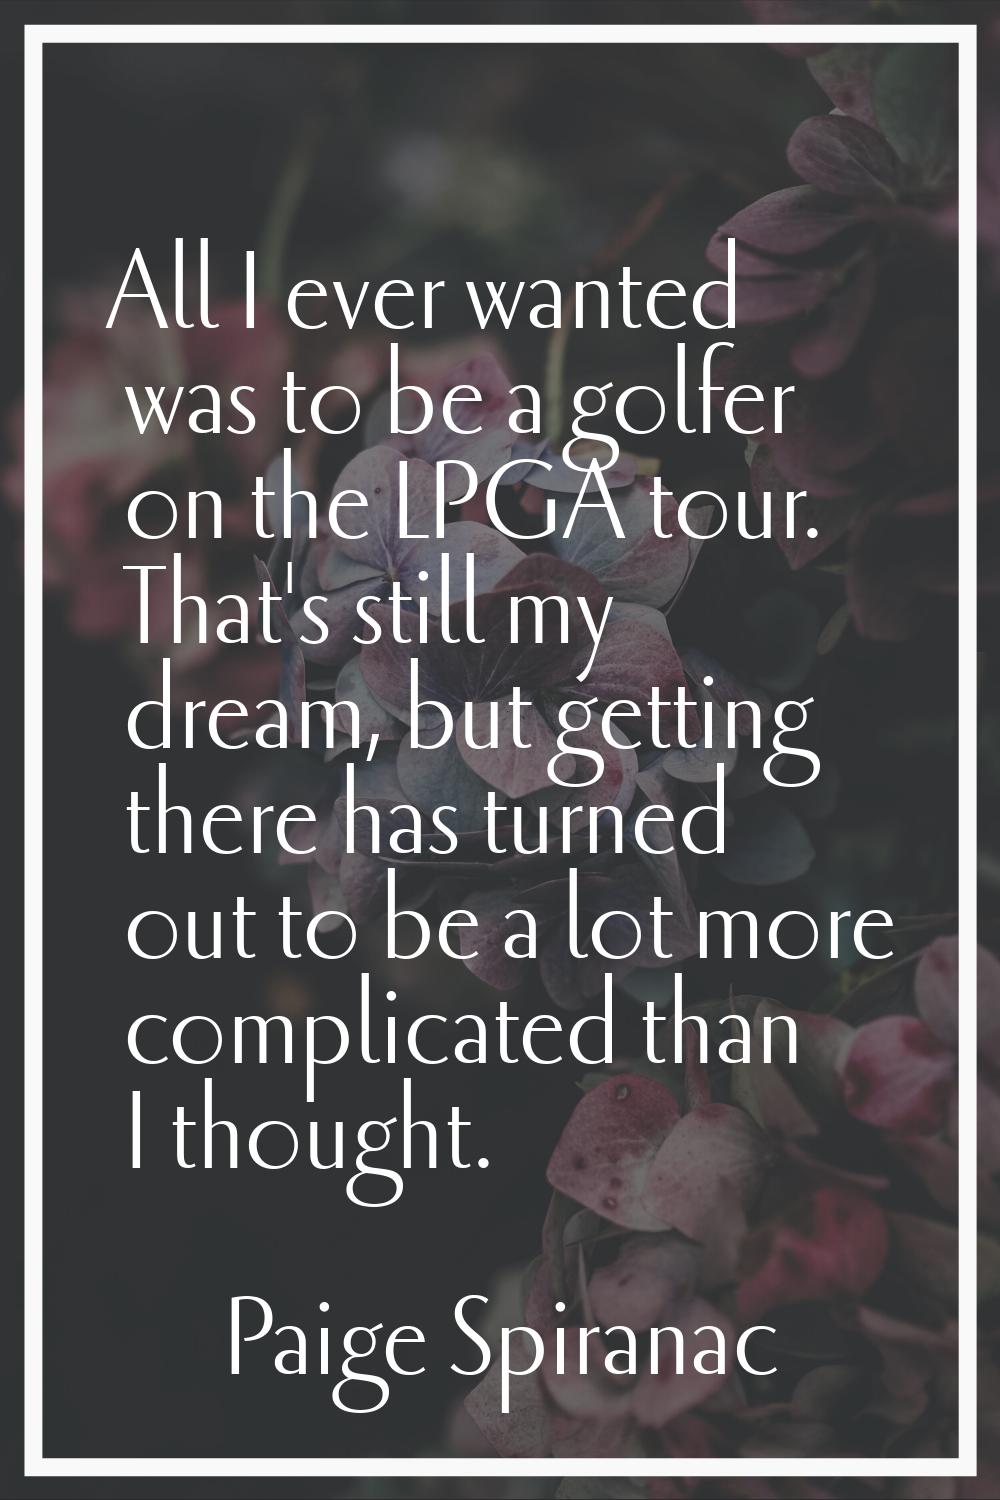 All I ever wanted was to be a golfer on the LPGA tour. That's still my dream, but getting there has